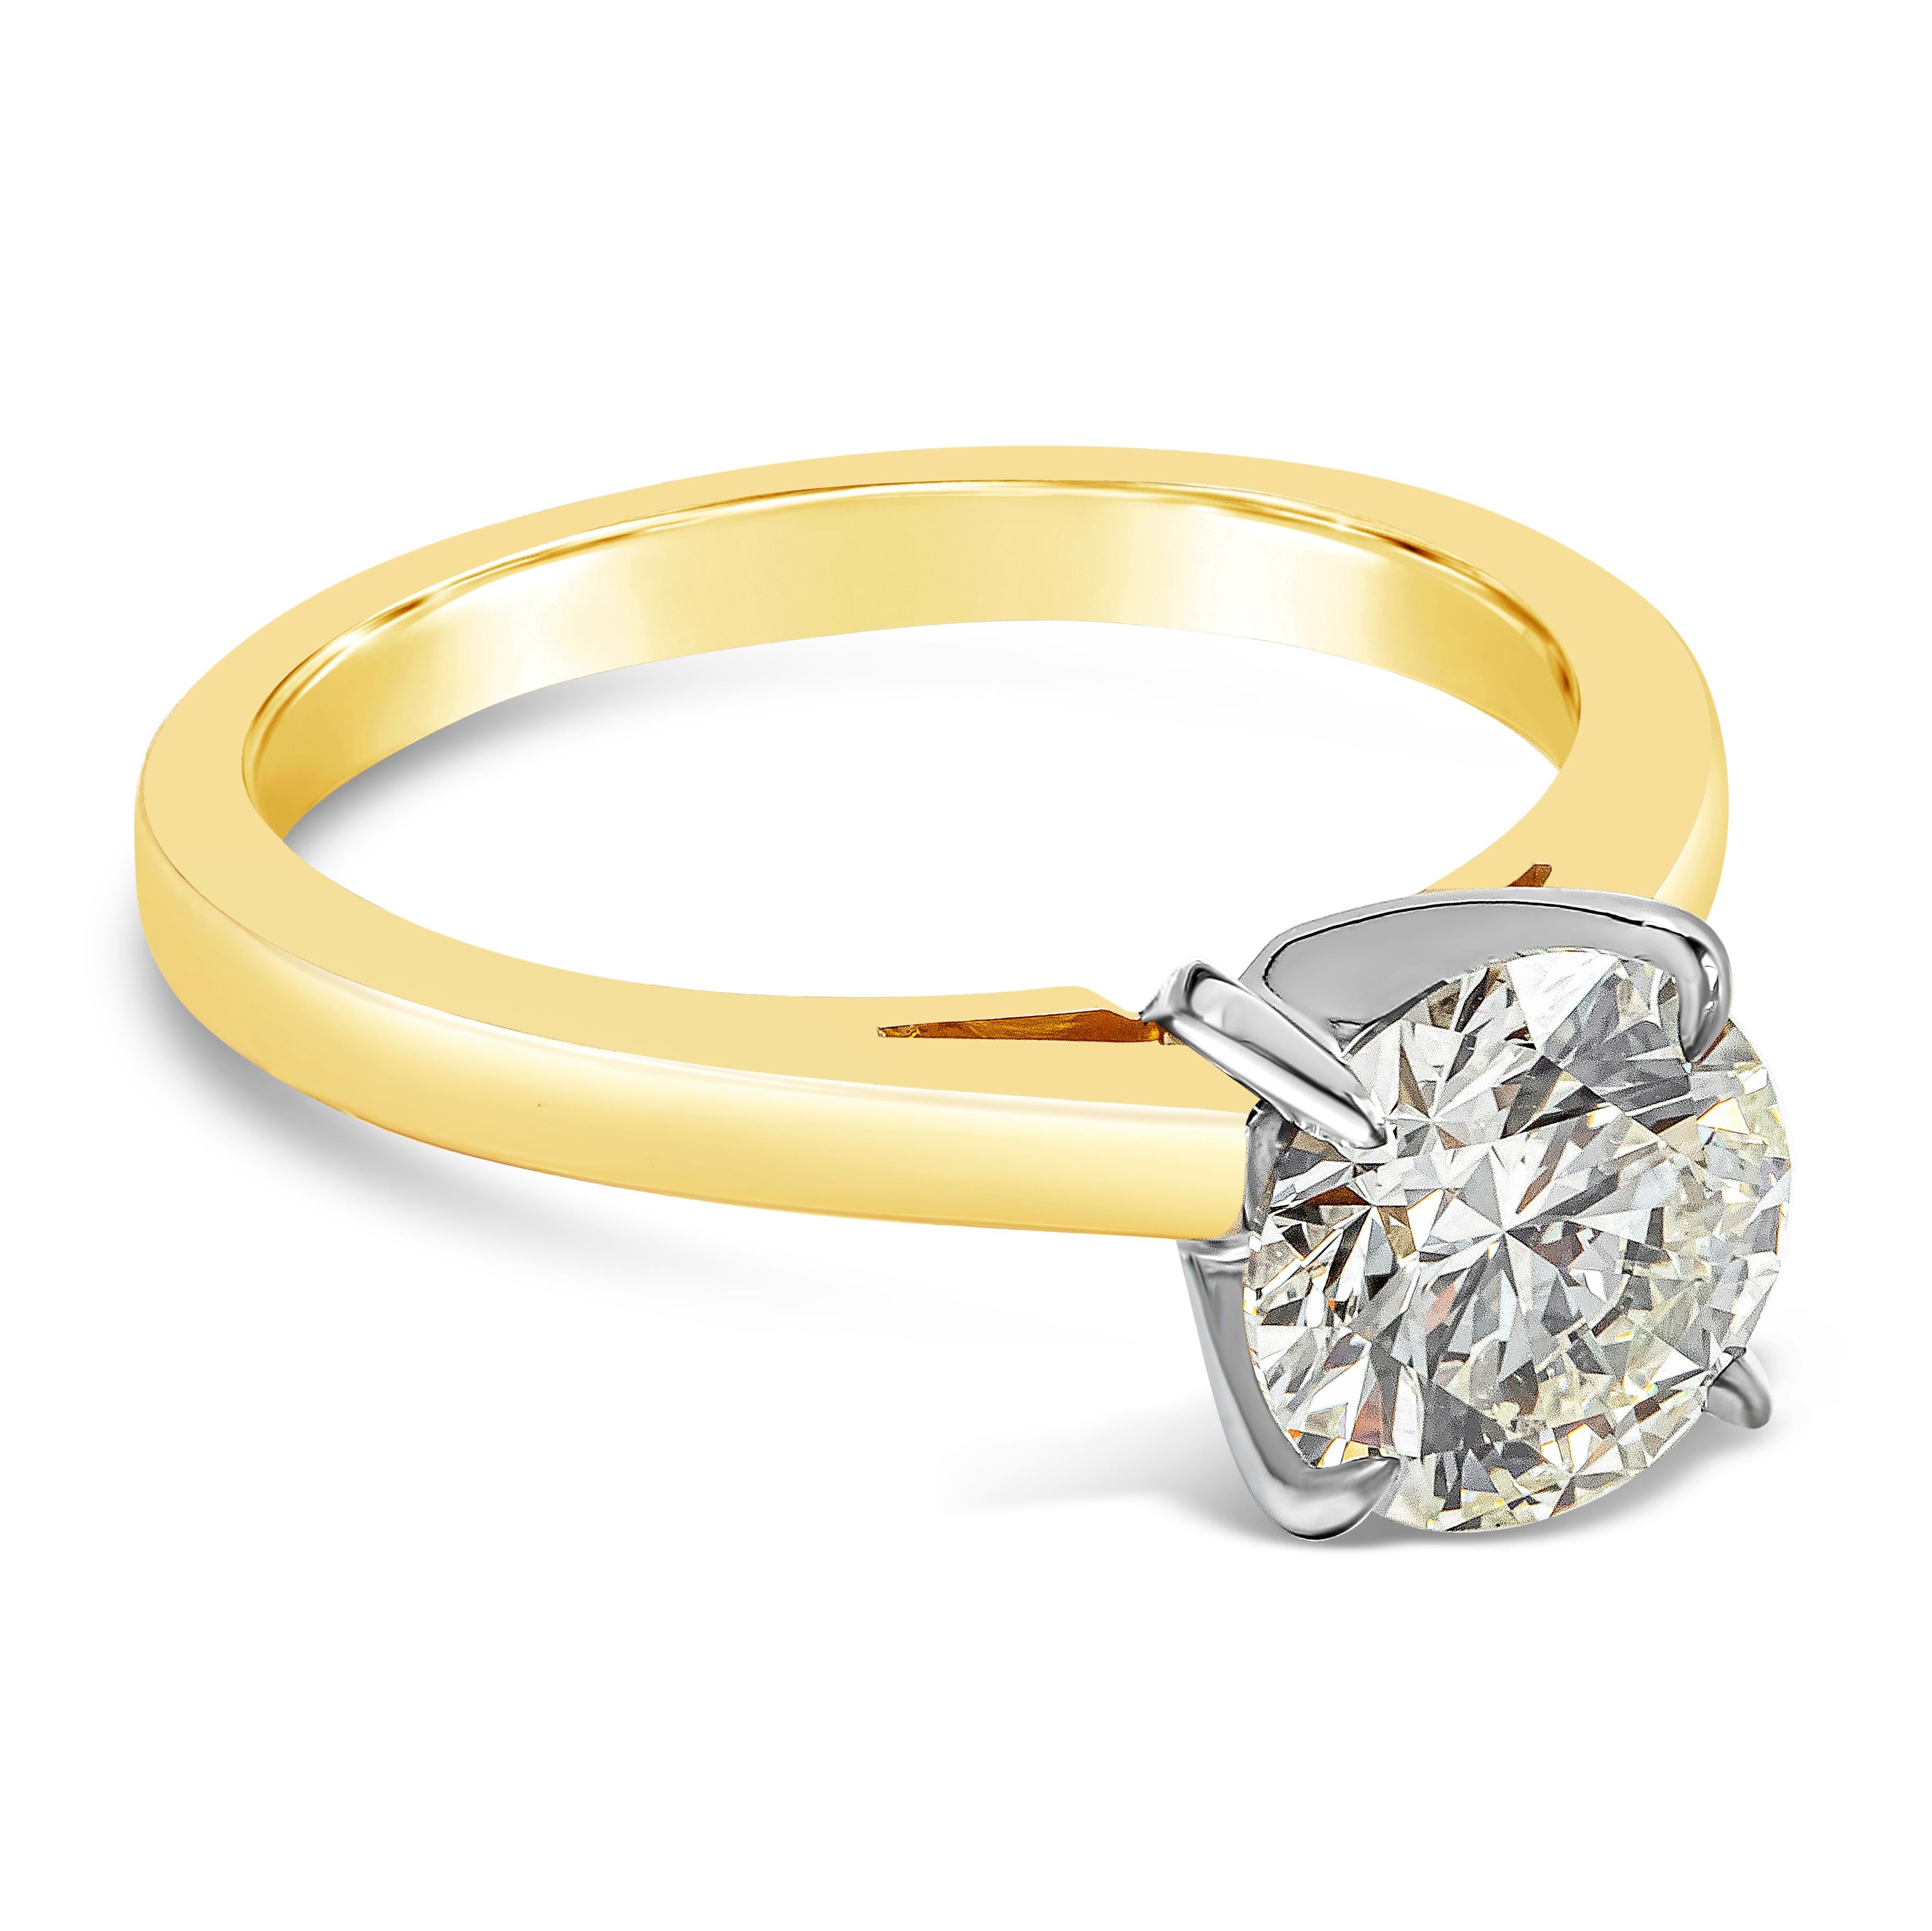 A classic and timeless engagement ring showcasing a single round brilliant diamond weighing 1.57 carats total, set in a thin 18K yellow gold mounting and classic 18K white gold four prong setting. GIA certified as N color and SI1 in clarity. Size